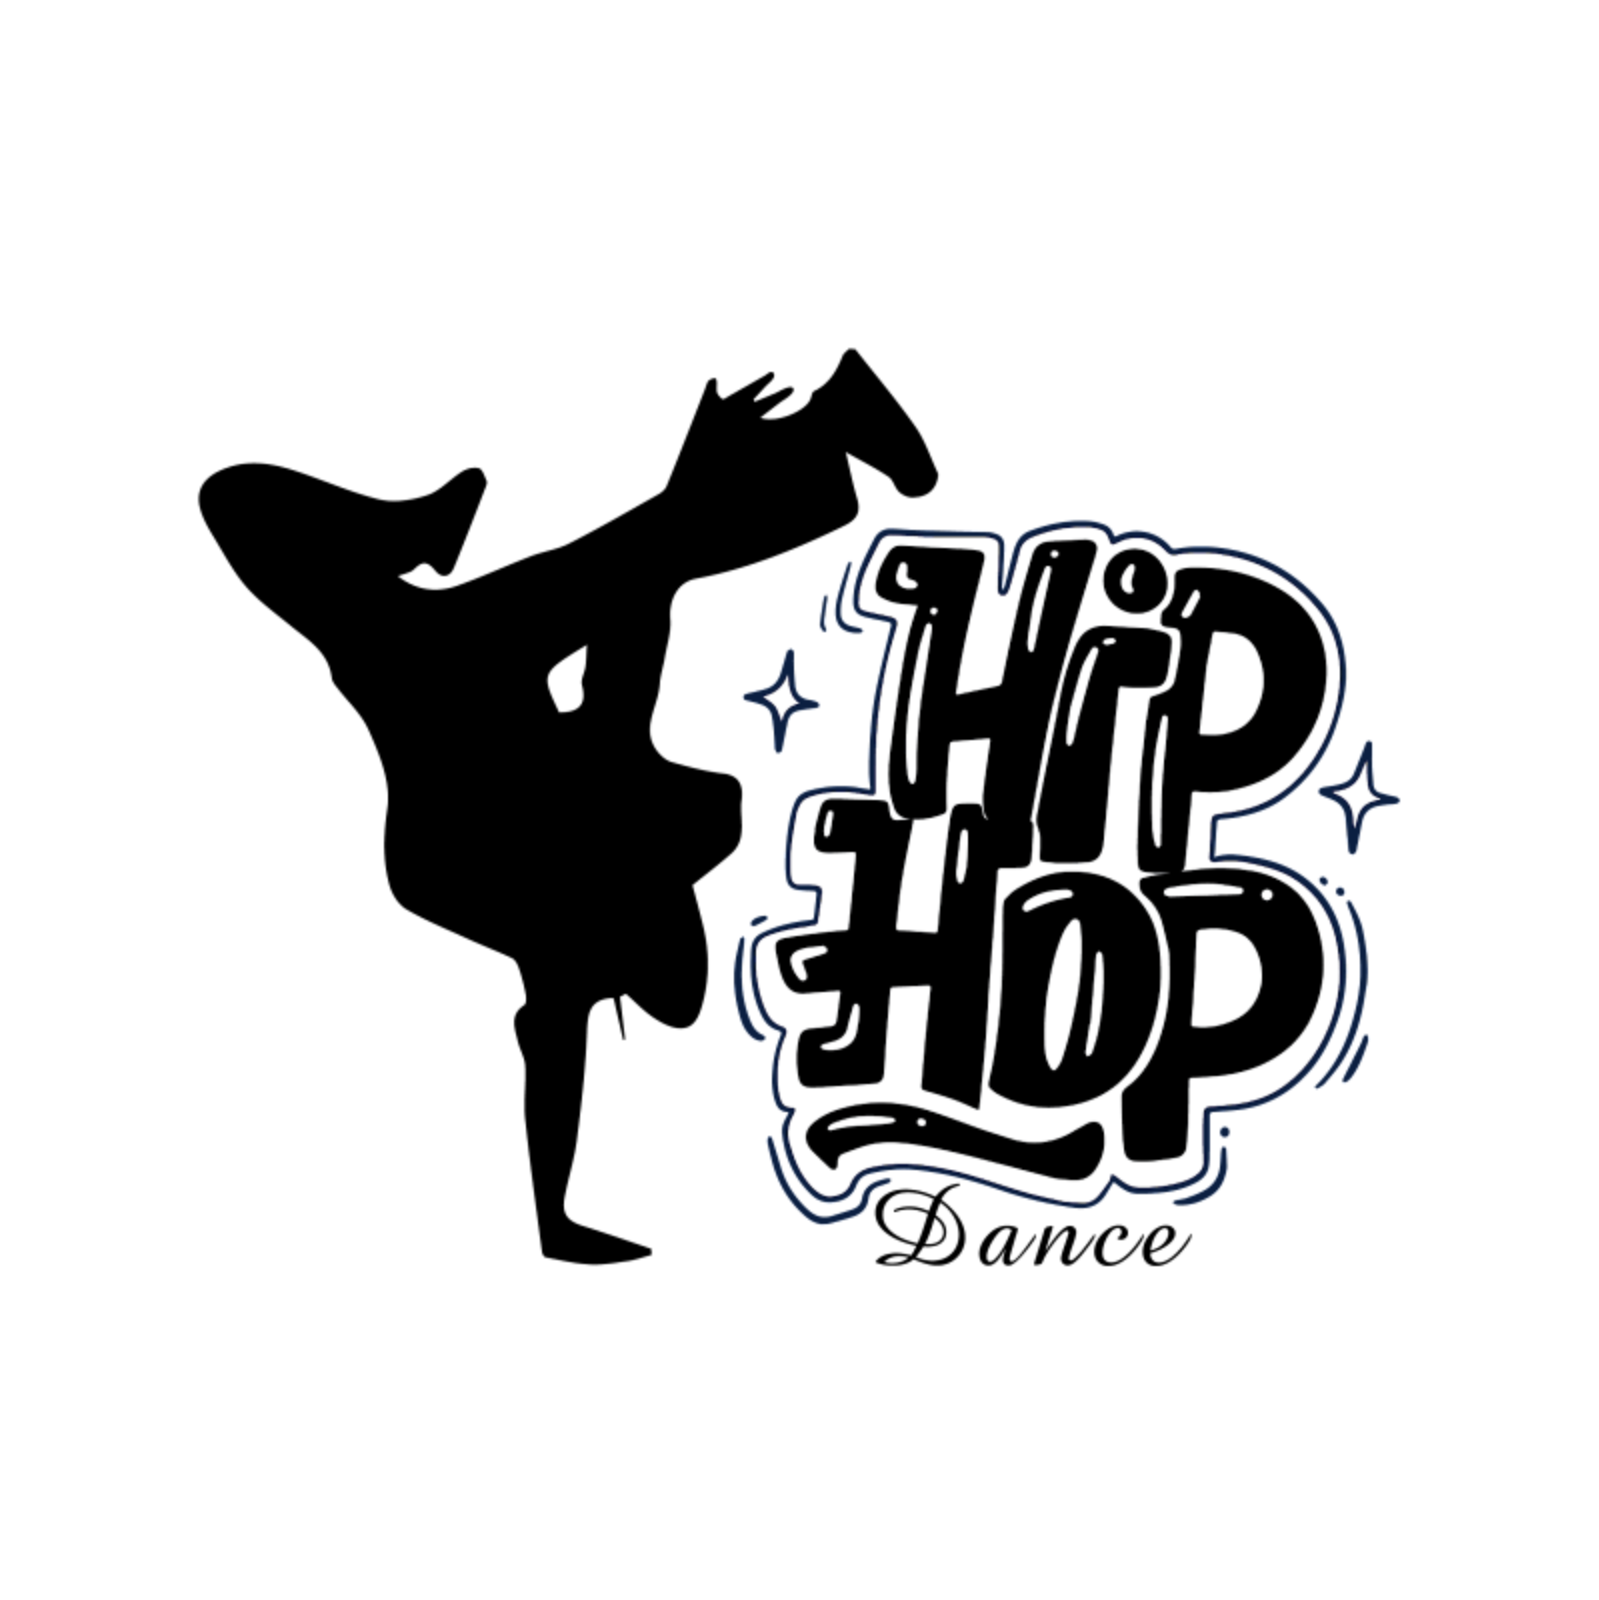 Text reads "Hip Hop Dance" and a black silhouette of someone standing on one arm